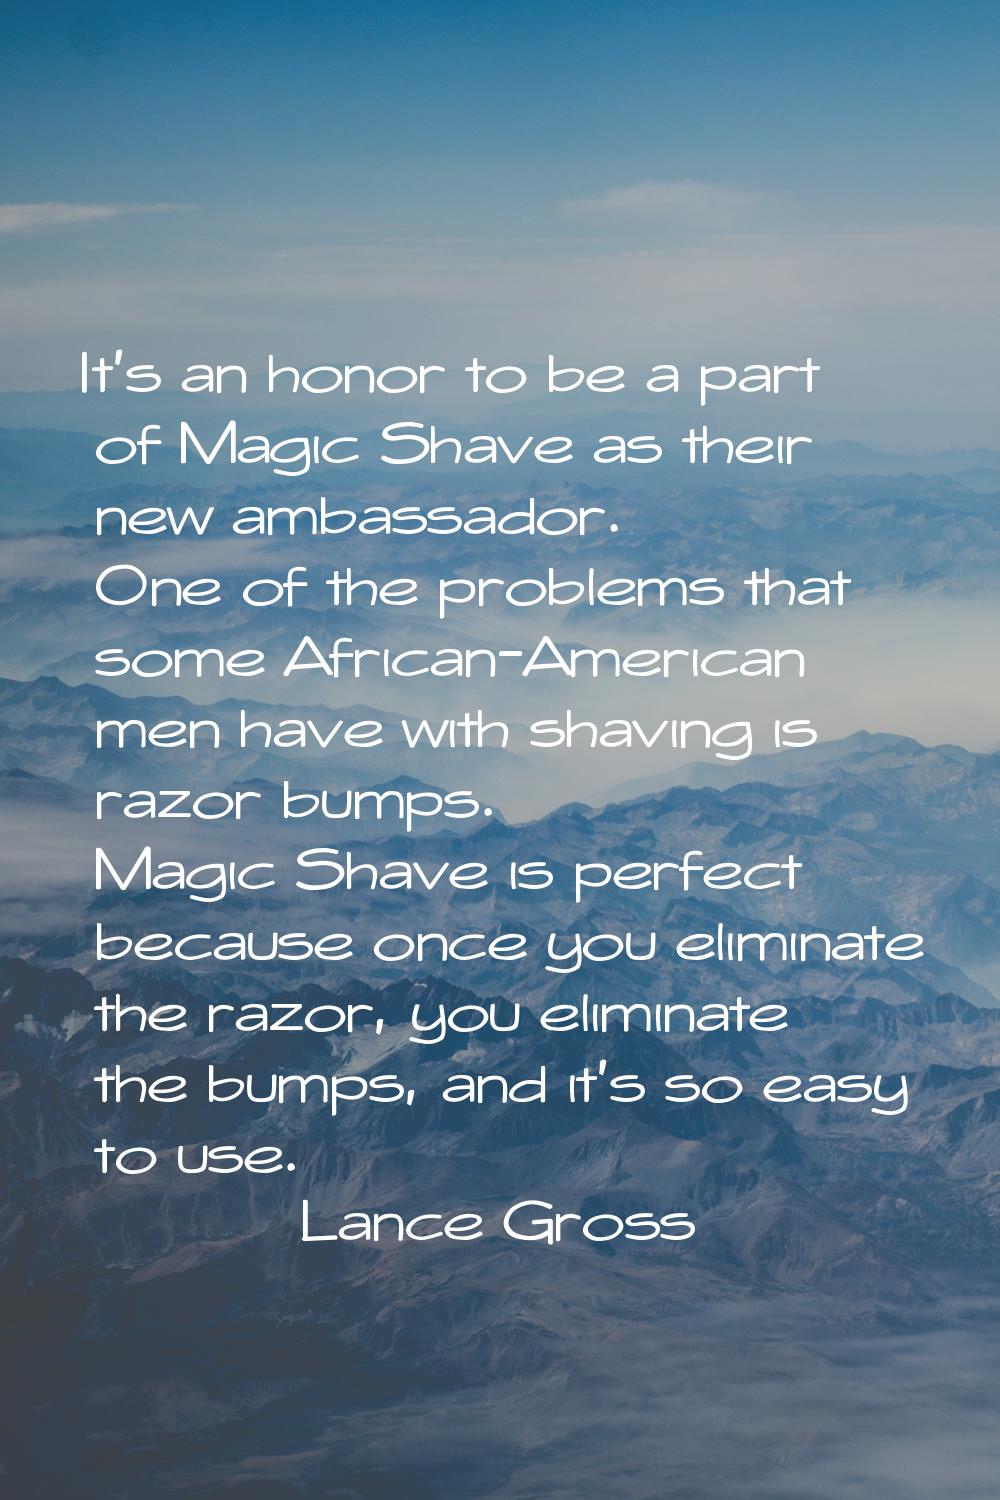 It's an honor to be a part of Magic Shave as their new ambassador. One of the problems that some Af